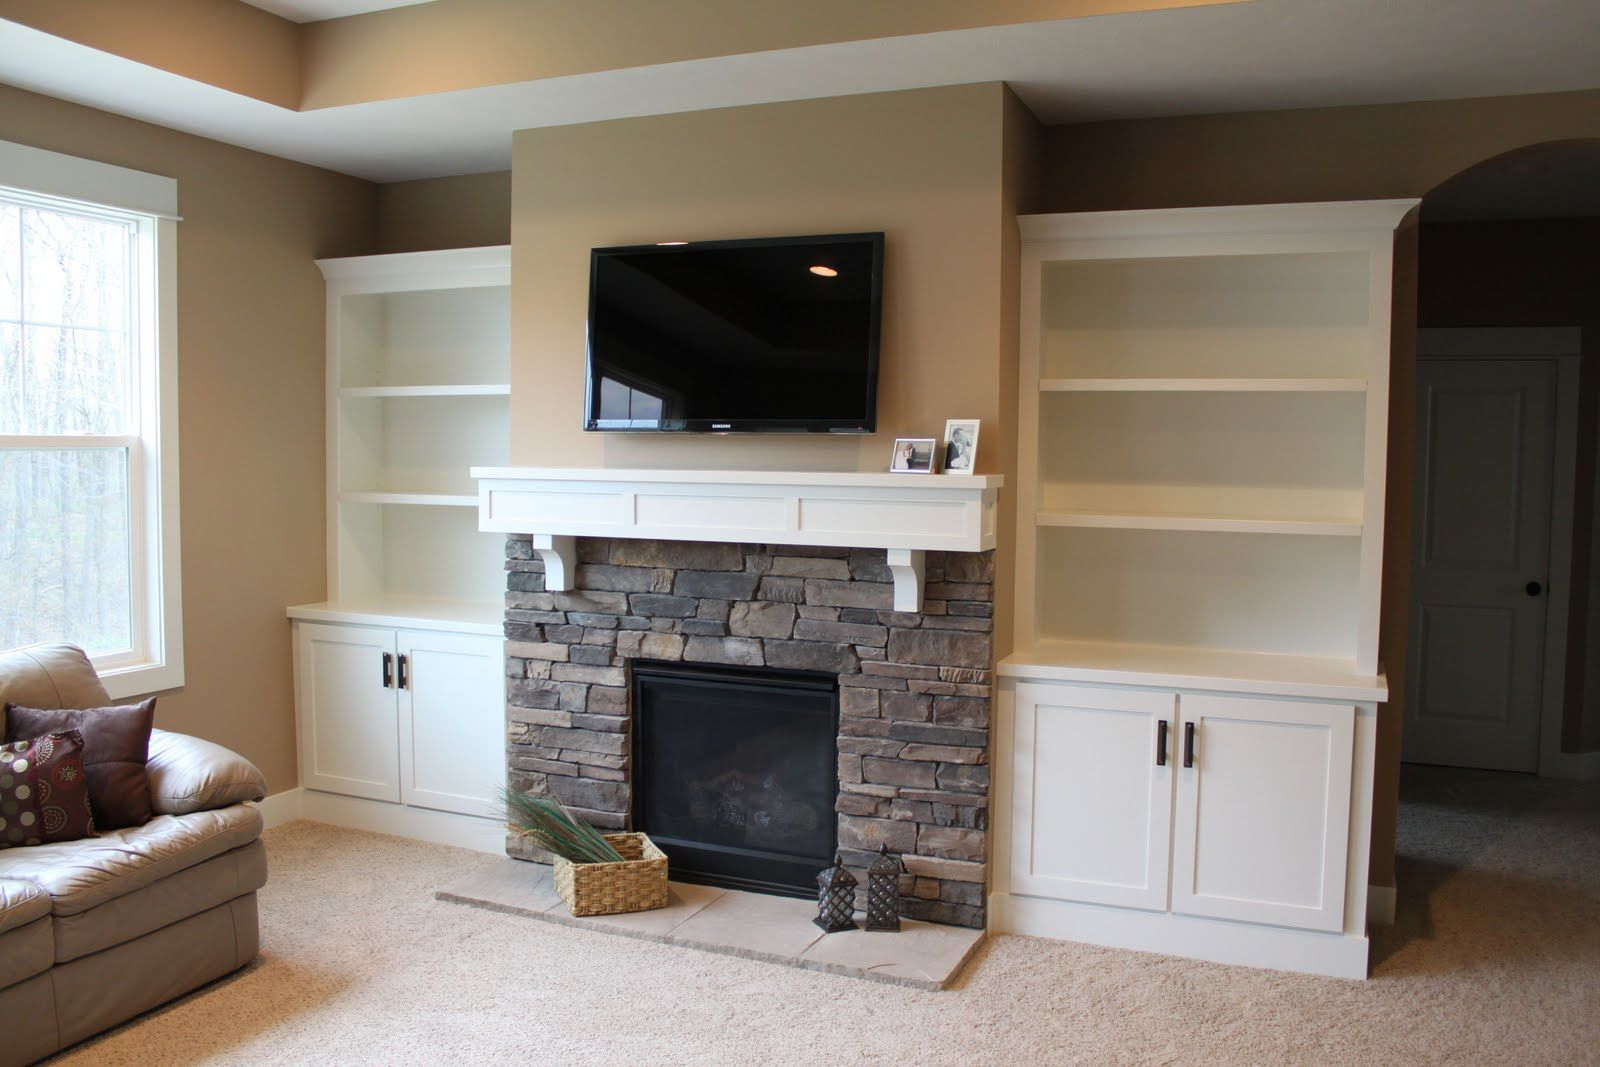 Built In Shelves Surrounding Fireplace Built In intended for sizing 1600 X 1067